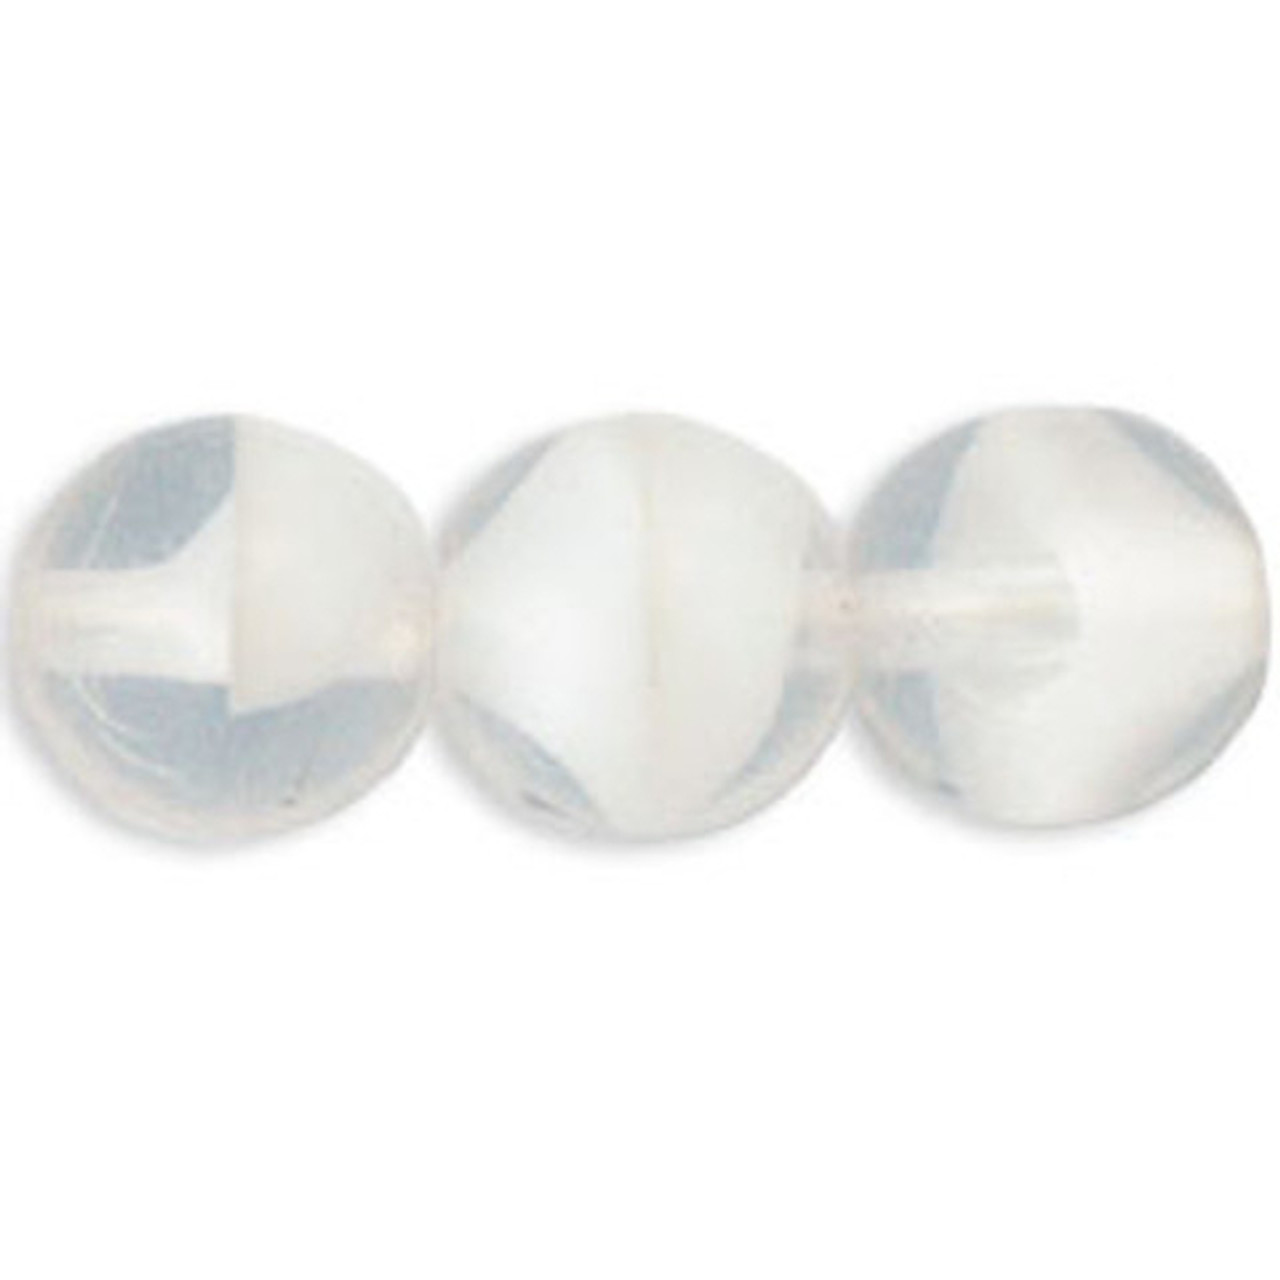 White Round Flat Czech Pressed Glass Beads (pack of 50)